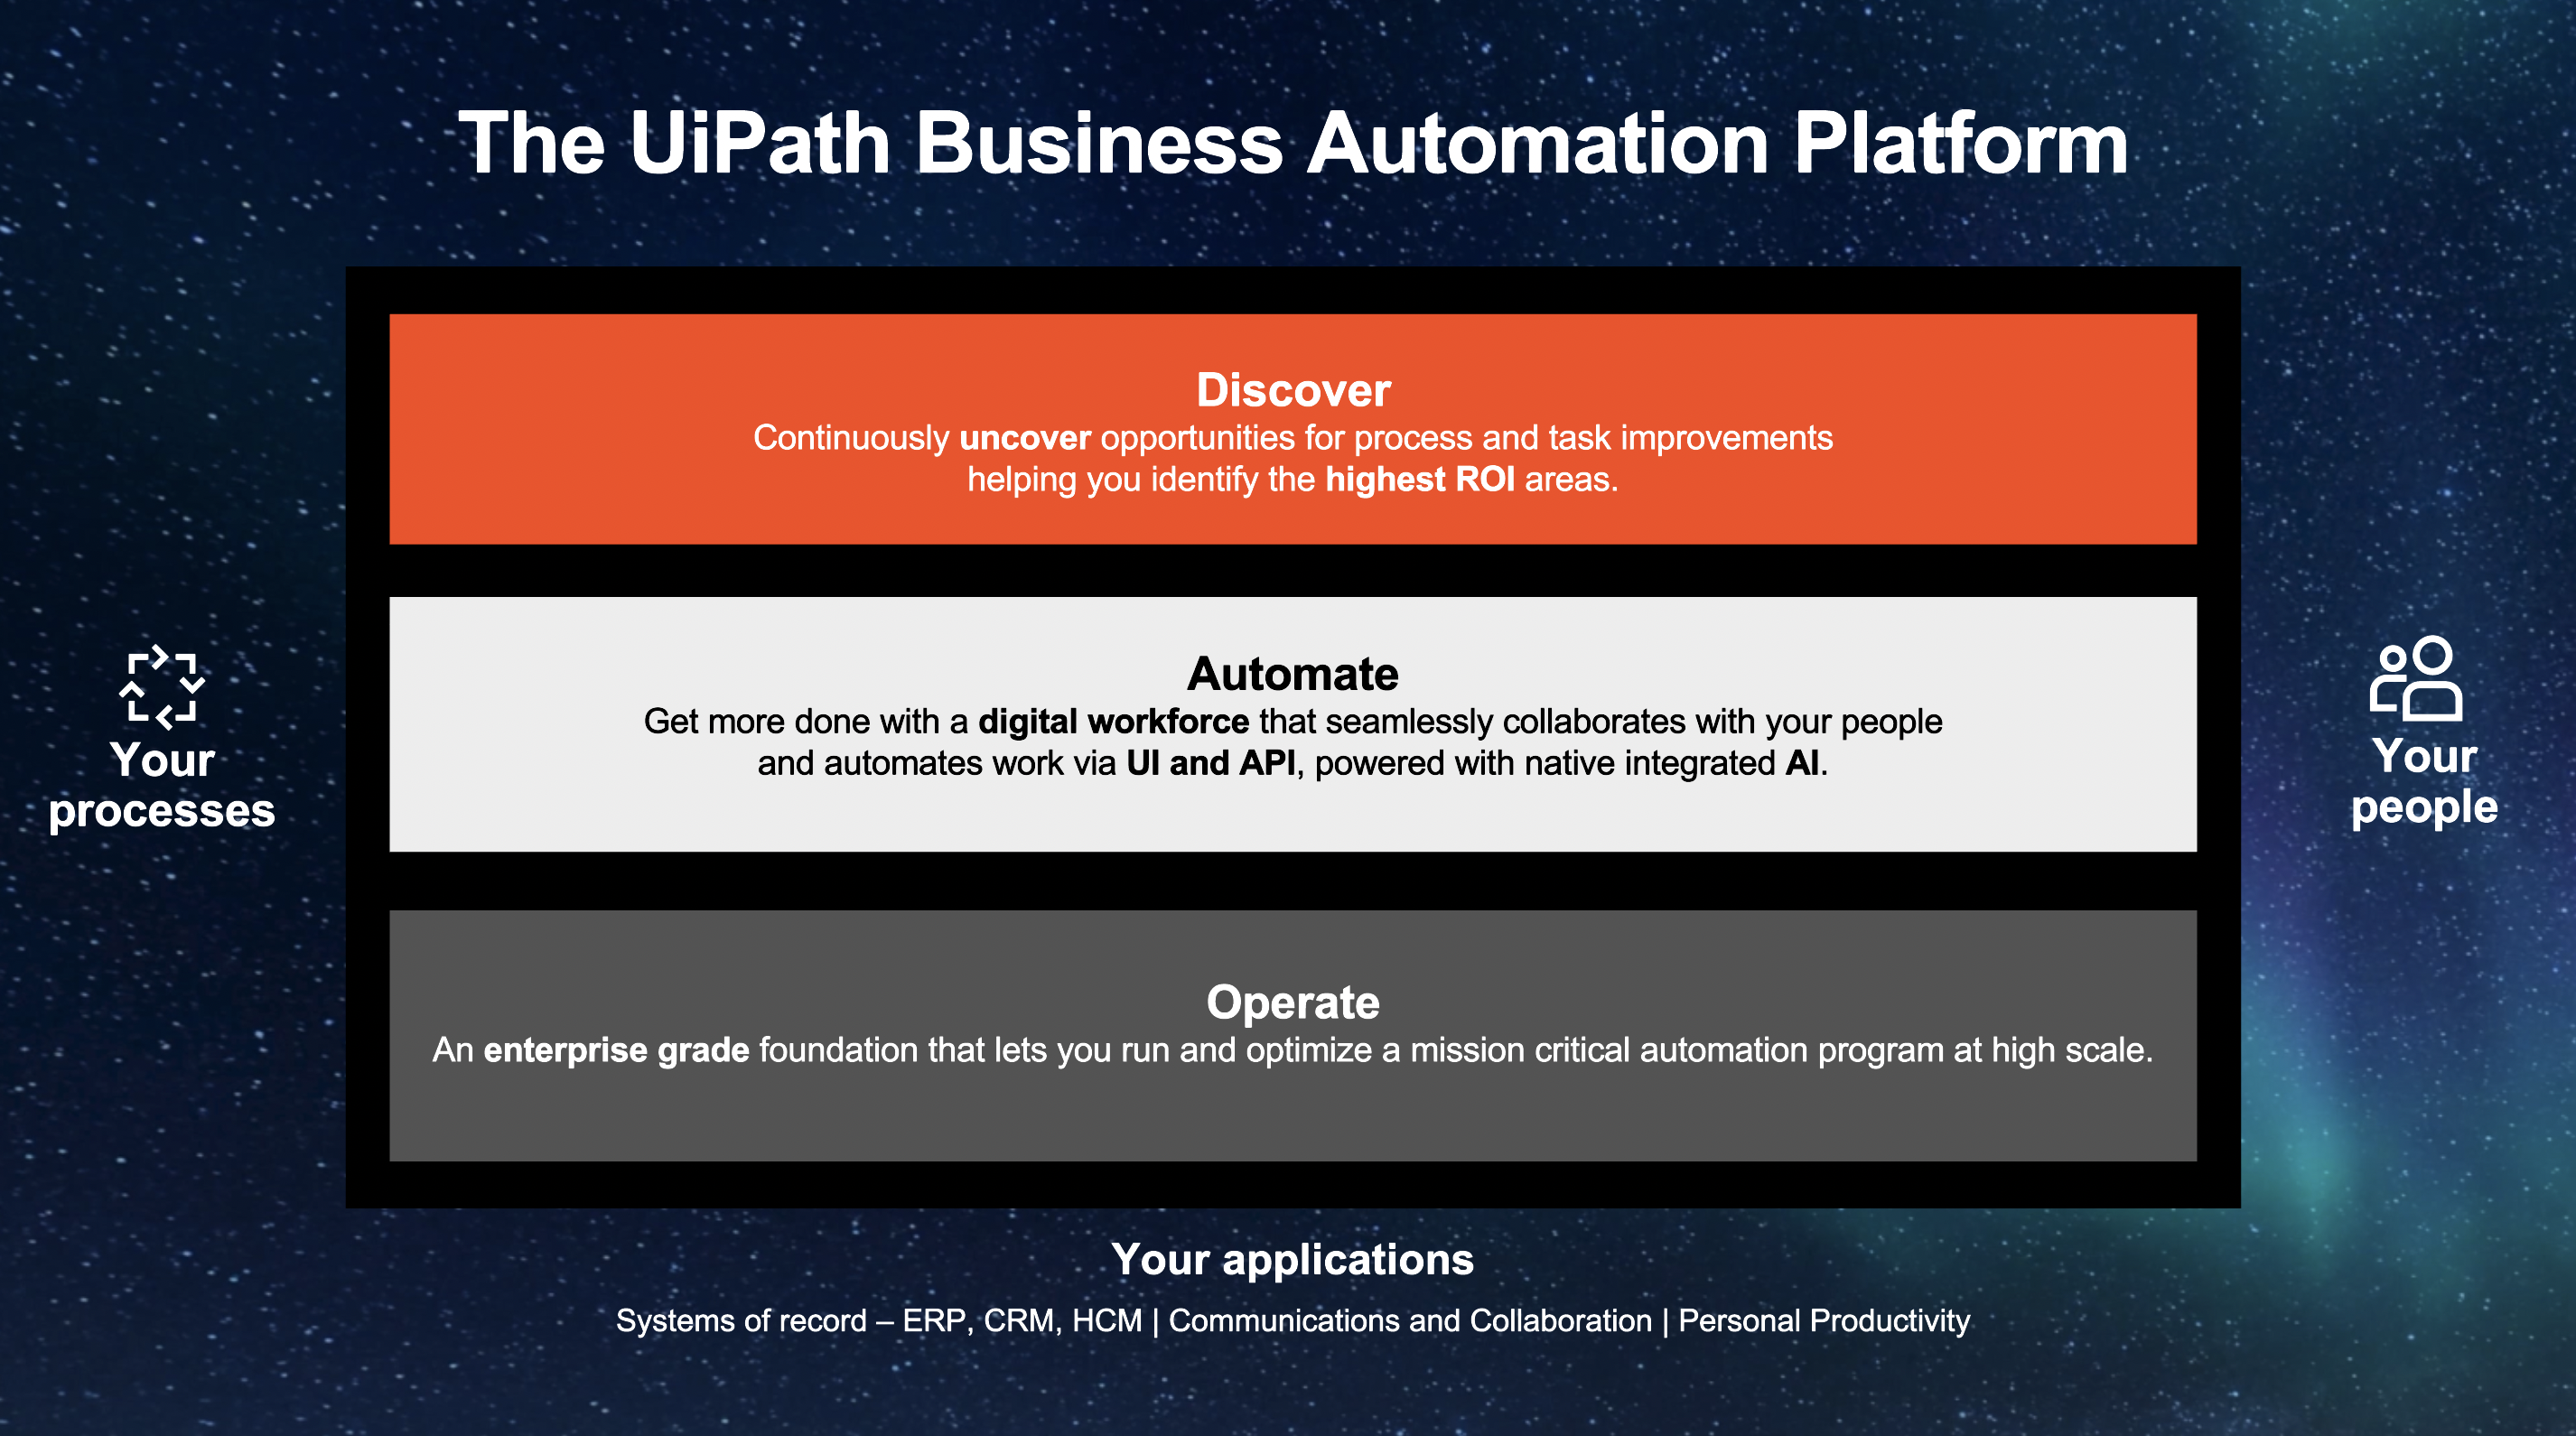 uipath business automation platform forward 5 conference 2022